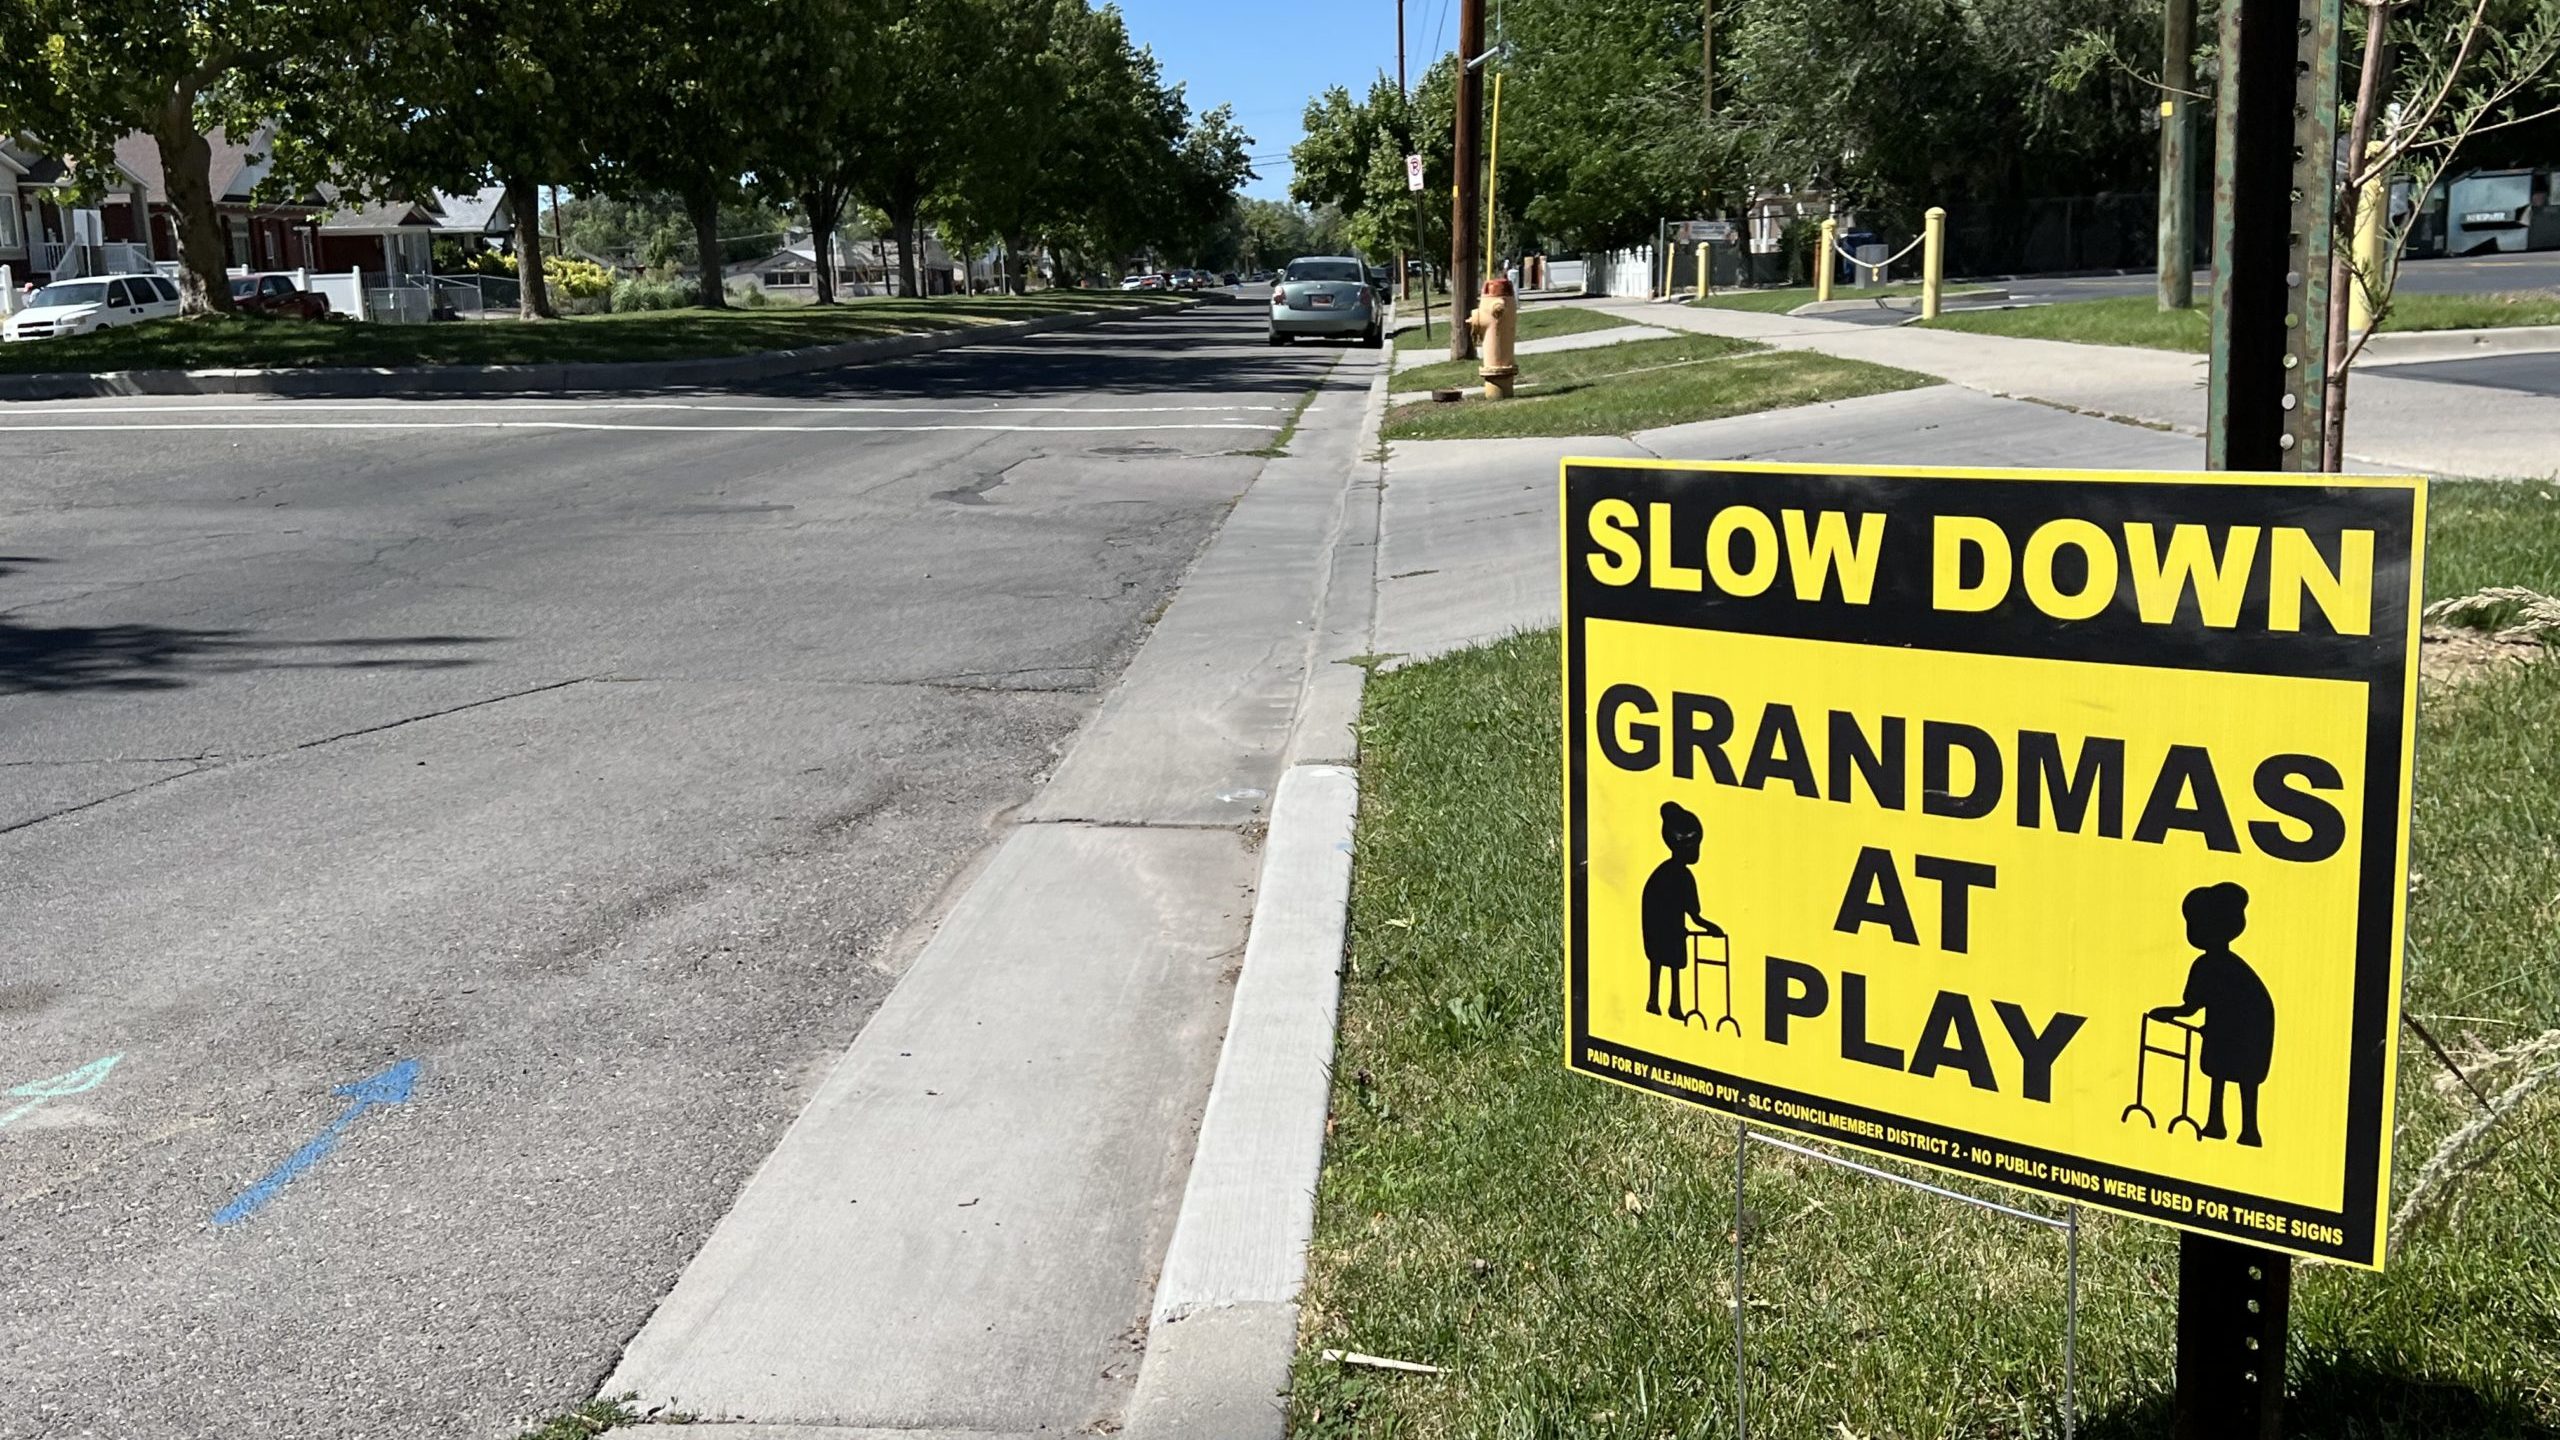 One of the signs created by SLC Councilmember Alejandro Puy for neighborhoods in west Salt Lake. (A...